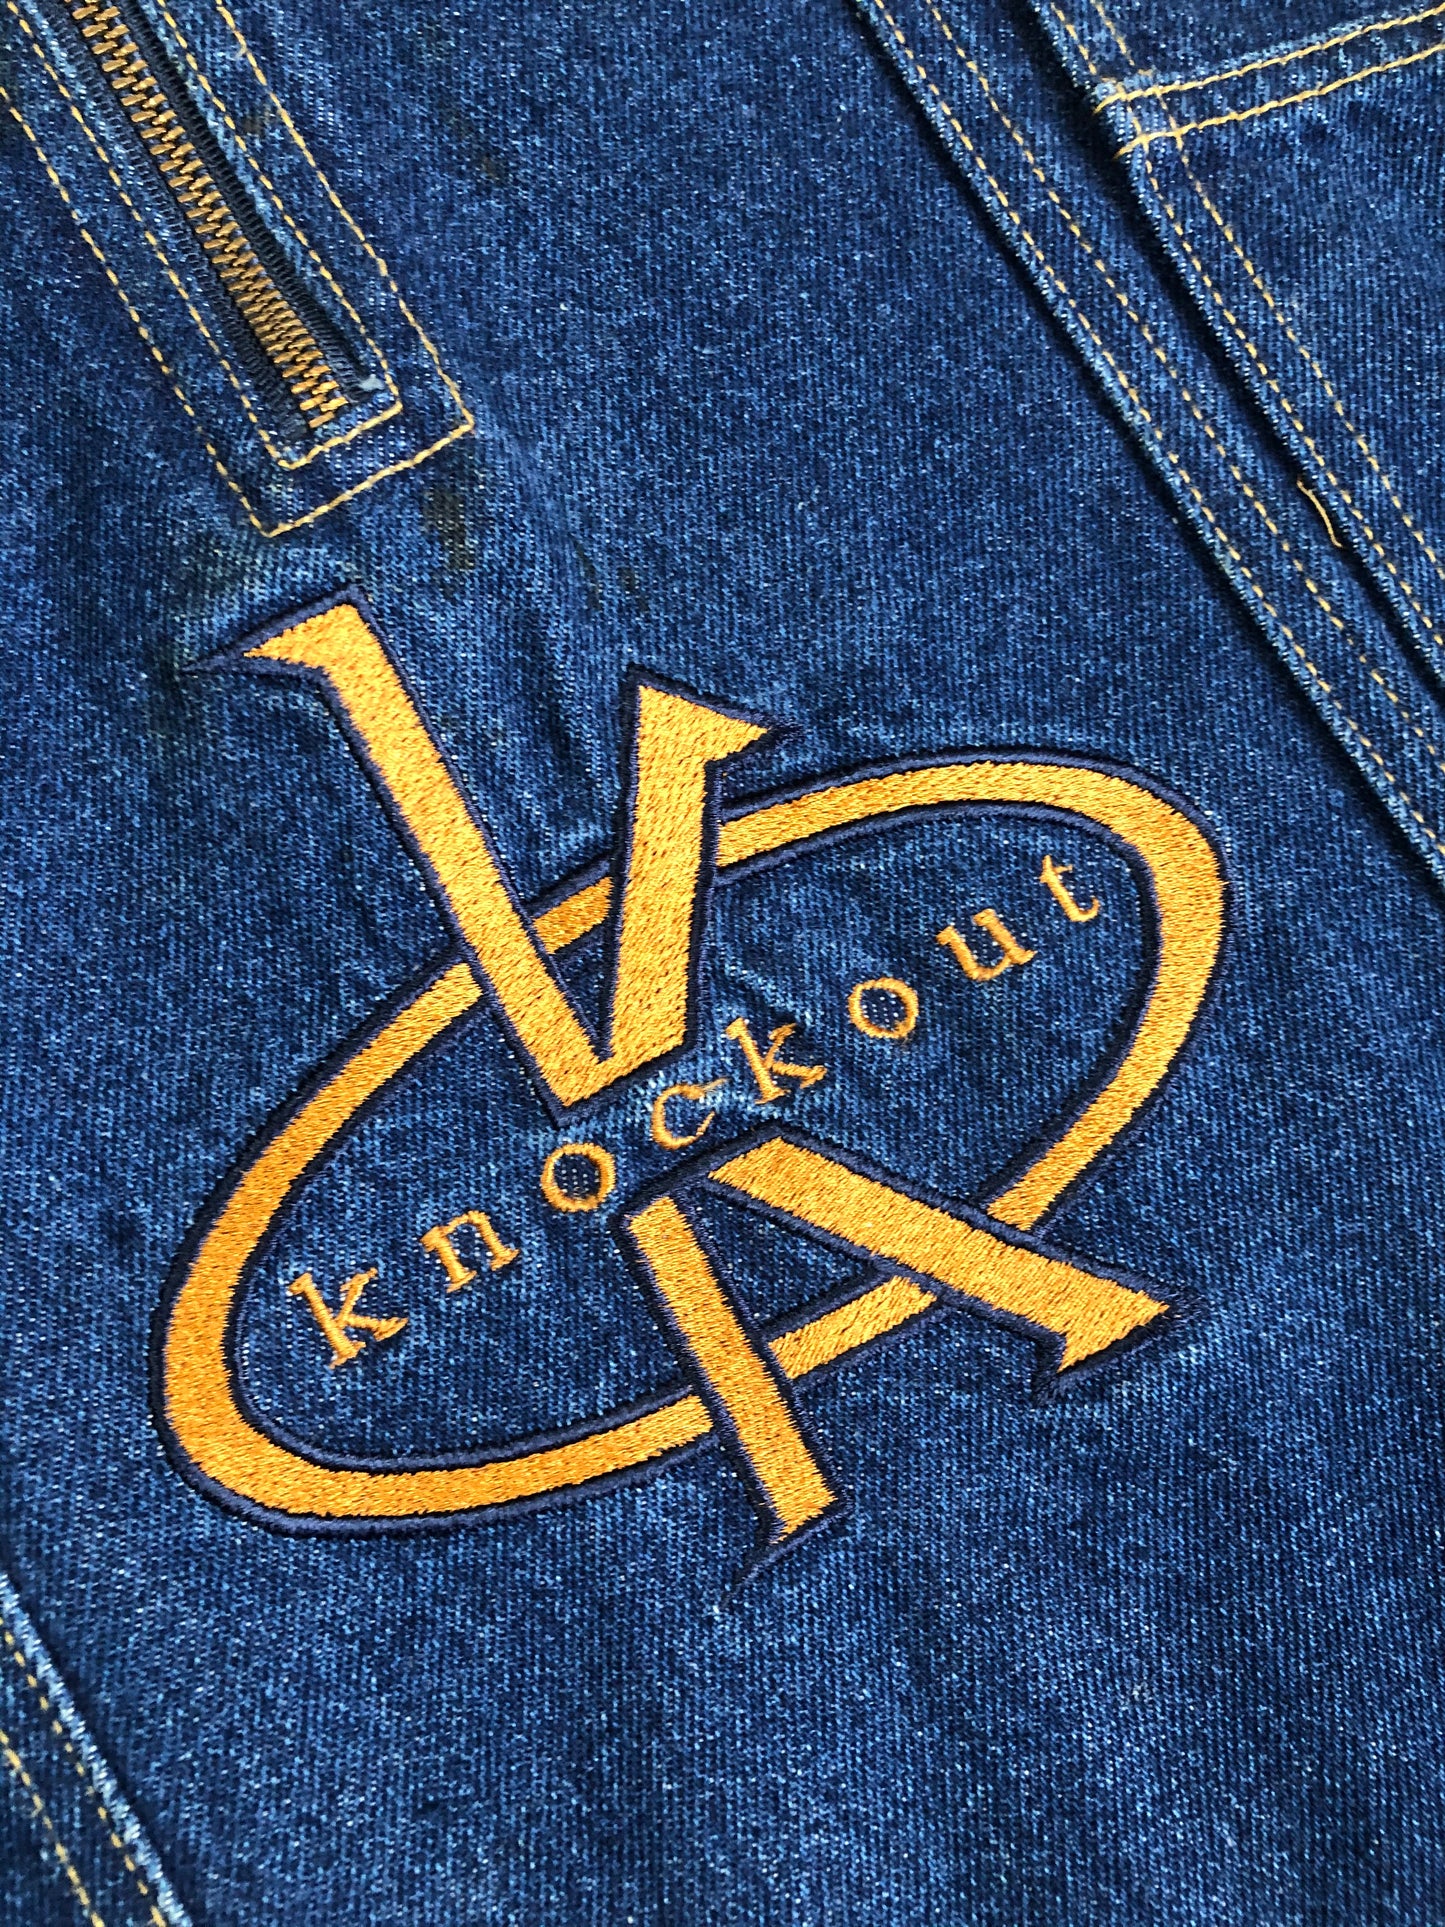 Kingspier Vintage - Vintage Knockout Jeans pullover denim jacket in a medium wash with quarter zip closure, embroidered logo on the front, knit cuffs, slash pockets, one patch pocket on the chest and a leather patch on the back. Size Xl. Made in USA
